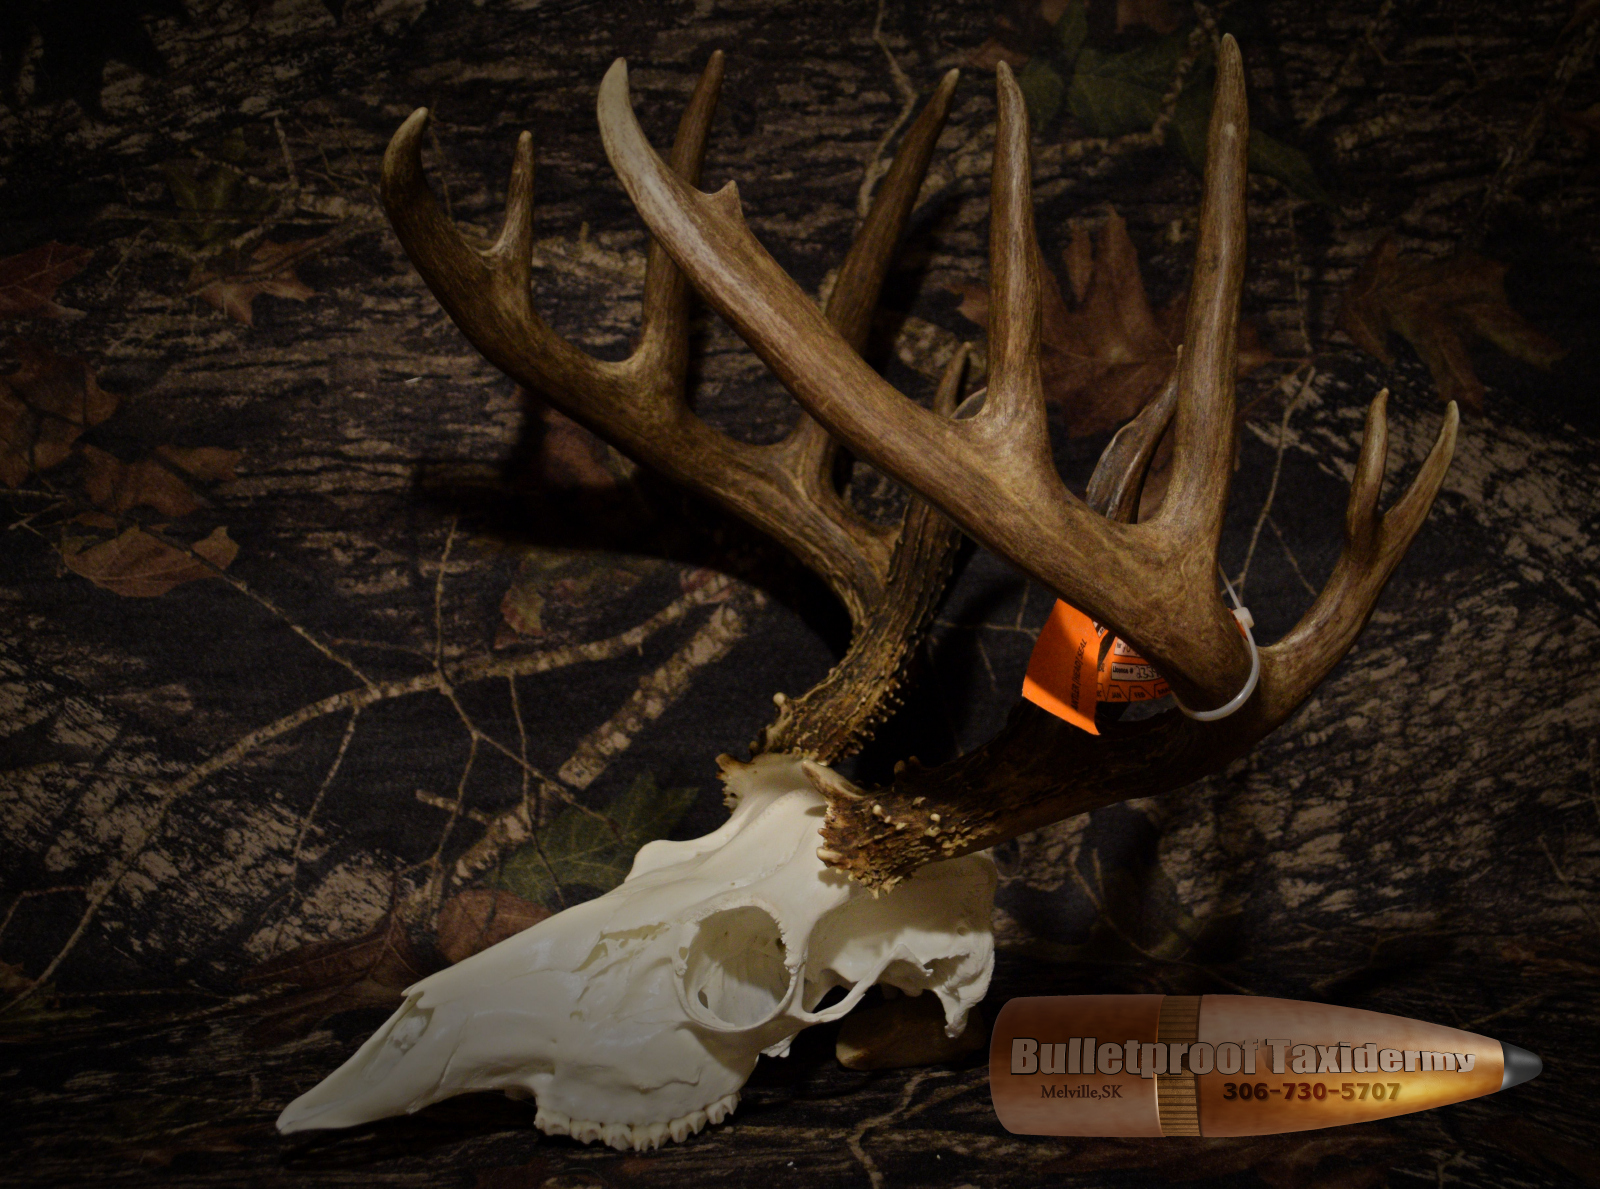 Whitetail Euro by Bulletproof Taxidermy- Melville, SK - Canada